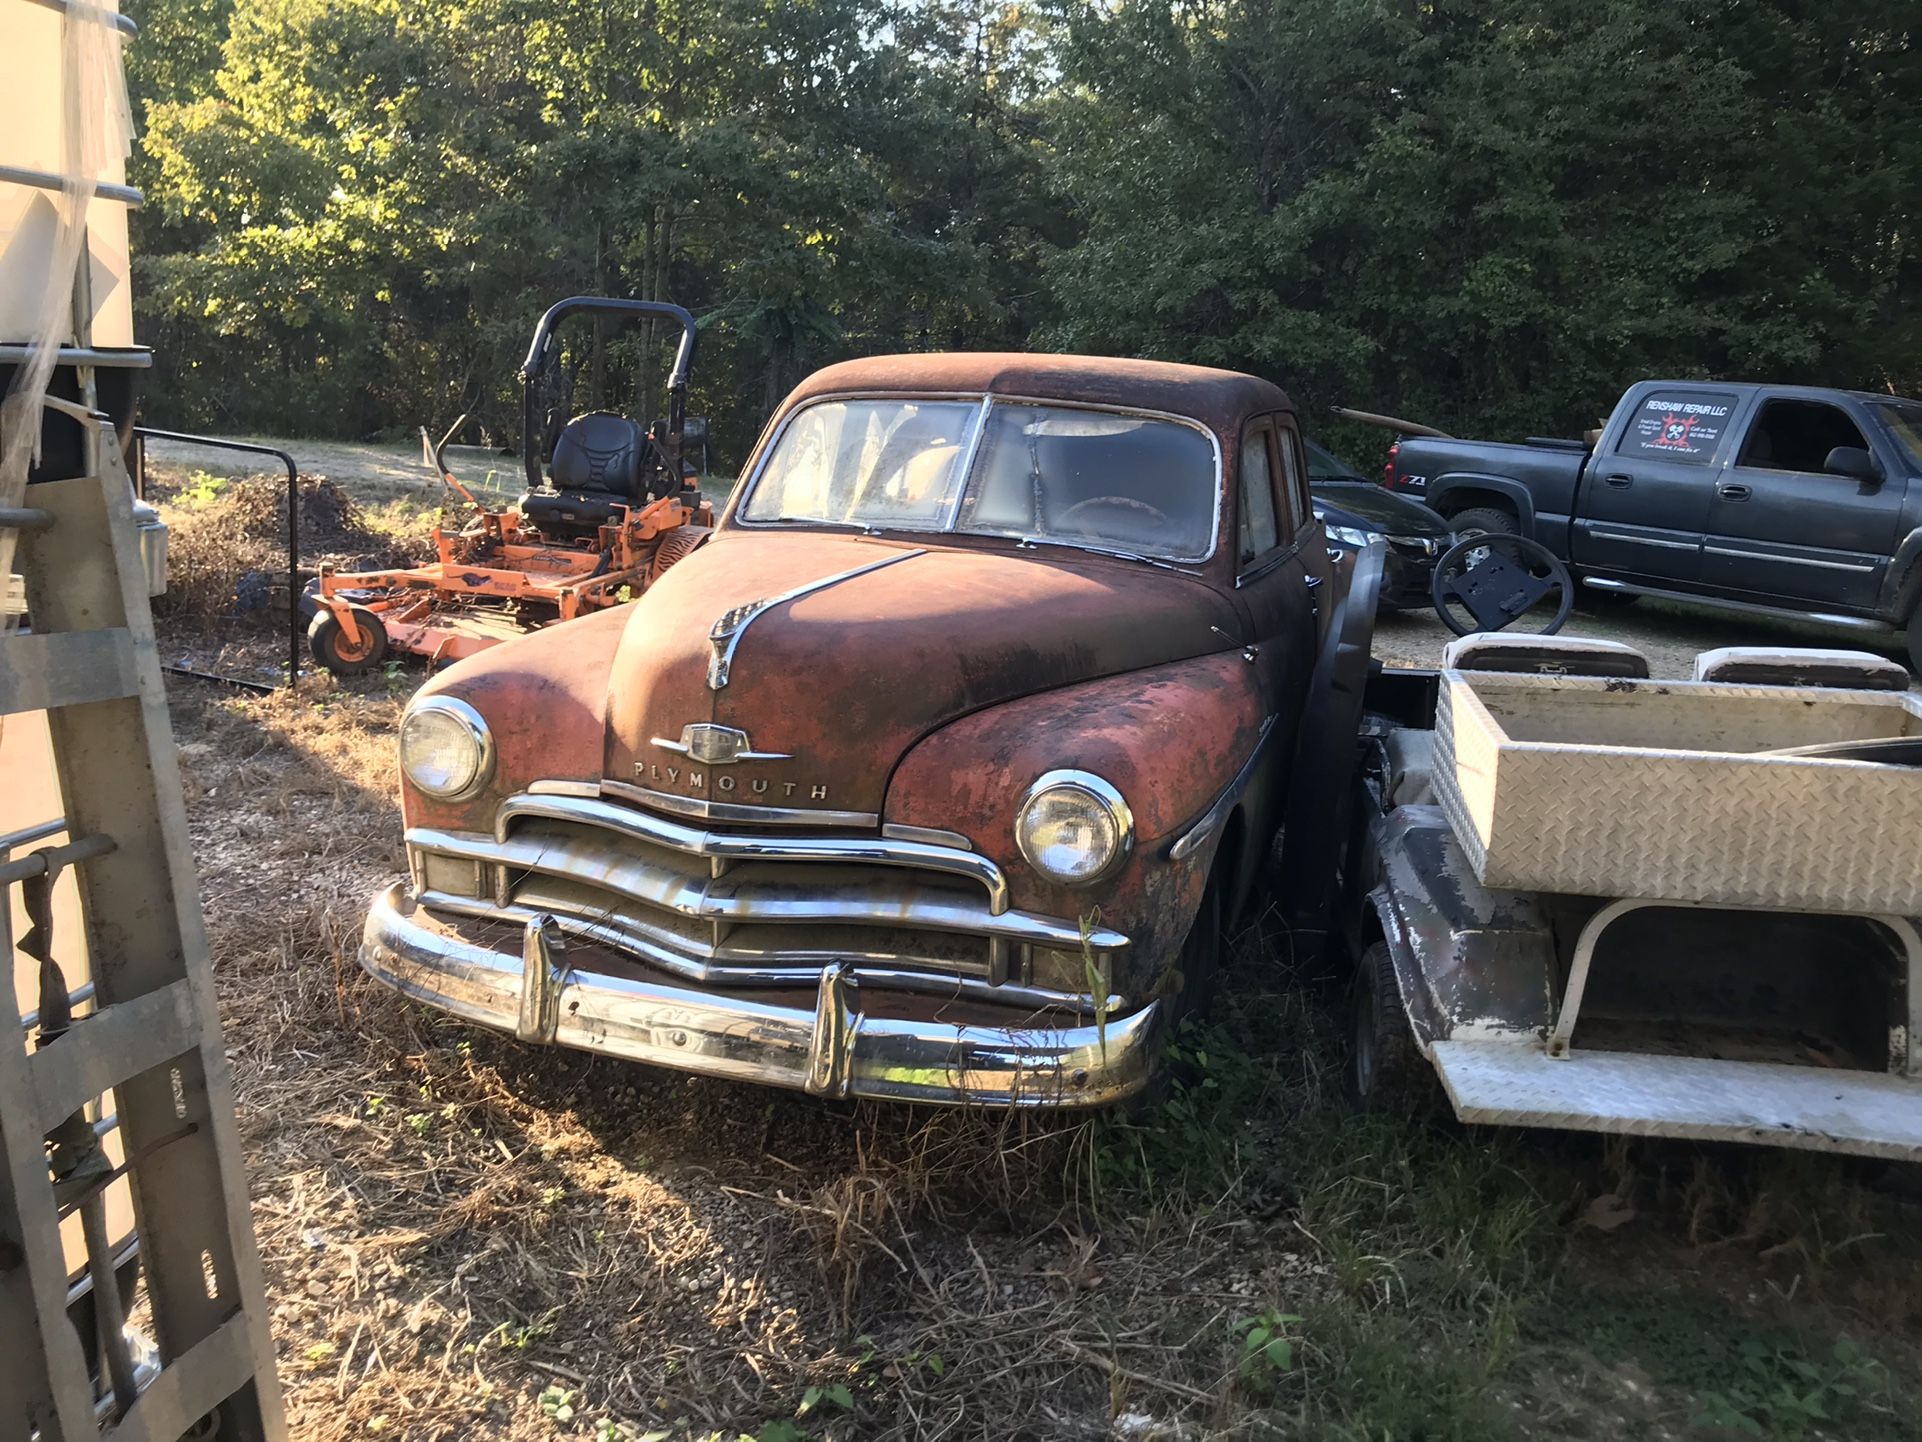 1949 Plymouth Special Deluxe. Completely Original. Missing Radiator. Been Sitting 